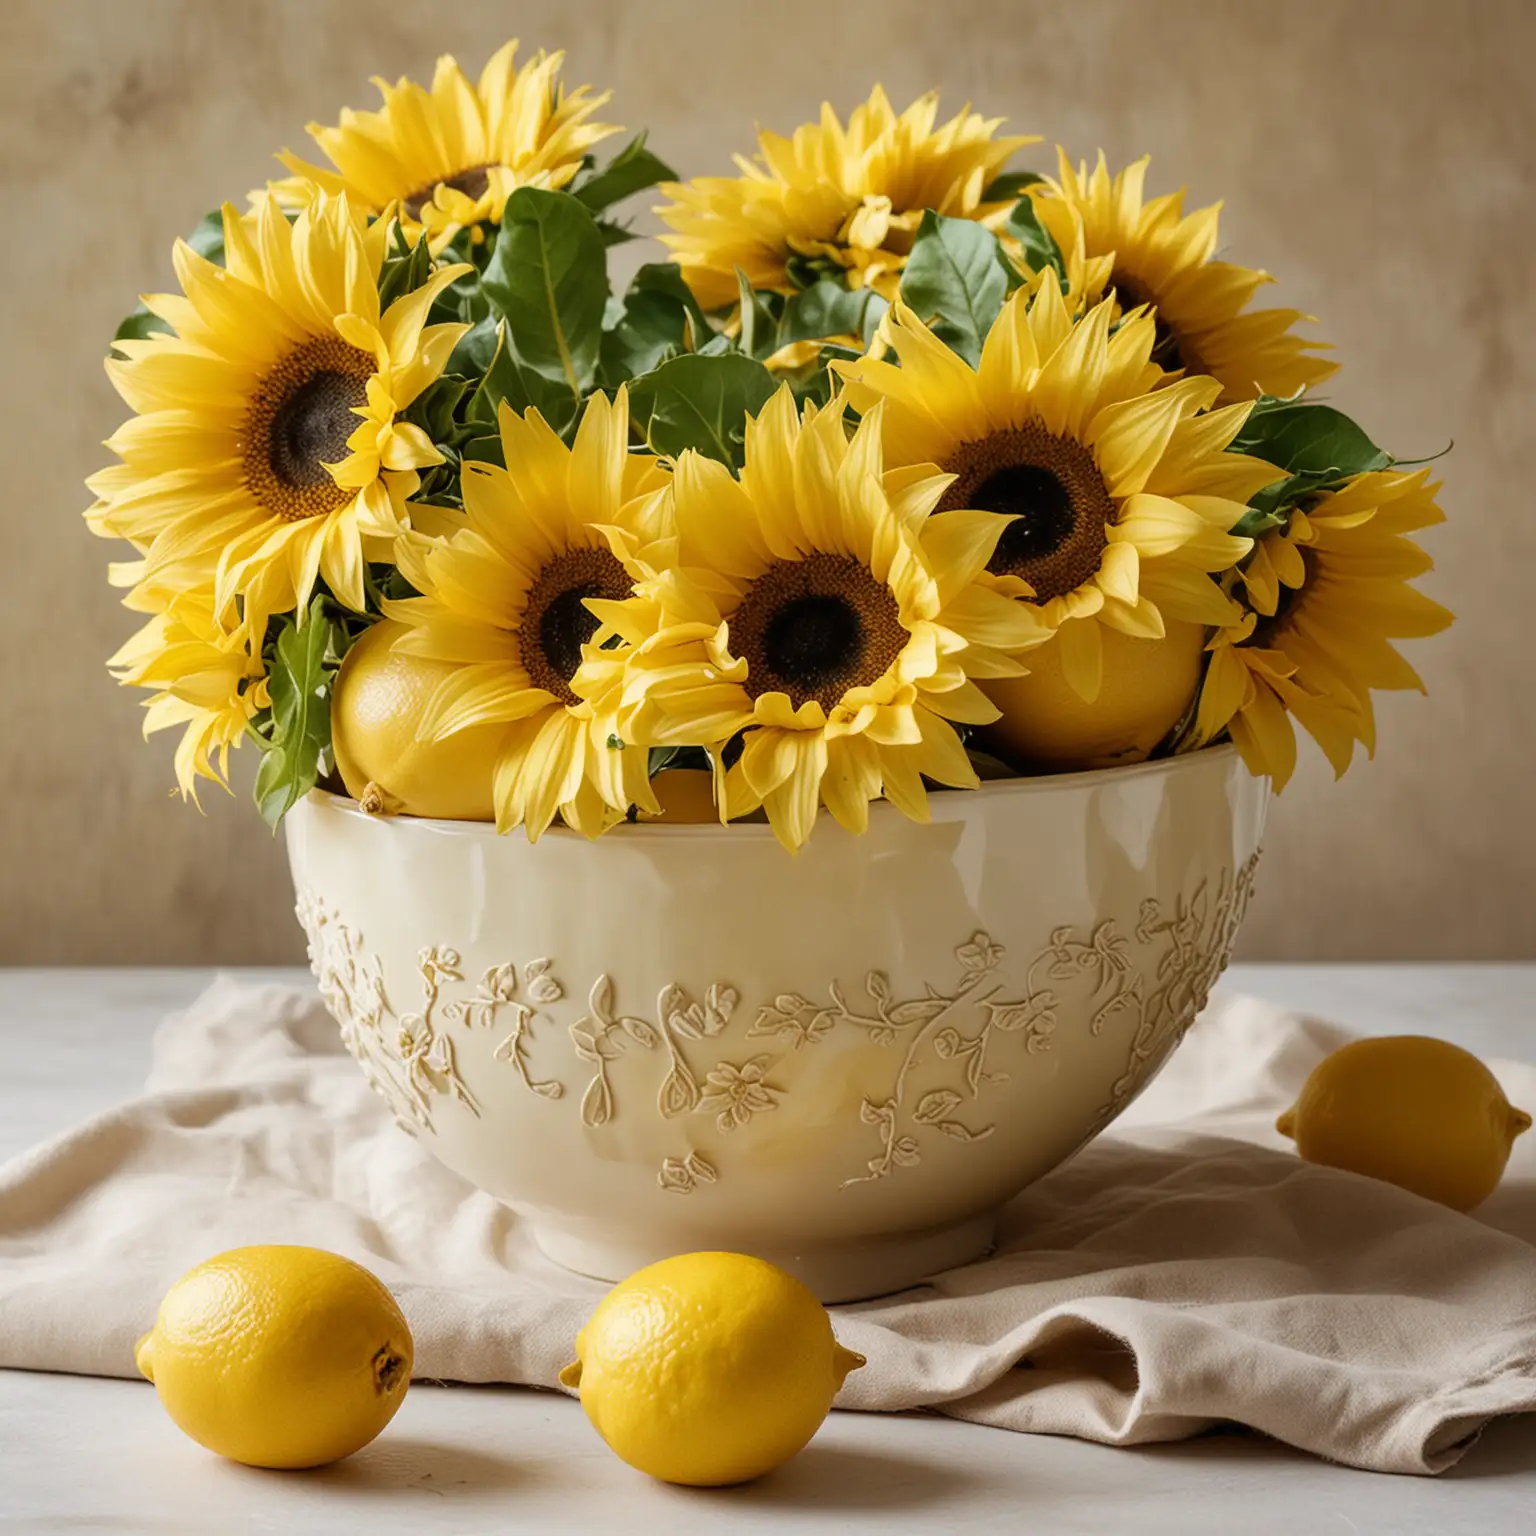 plain pale yellow bowl of lemons with sunflower blossoms without stems and nothing else in image